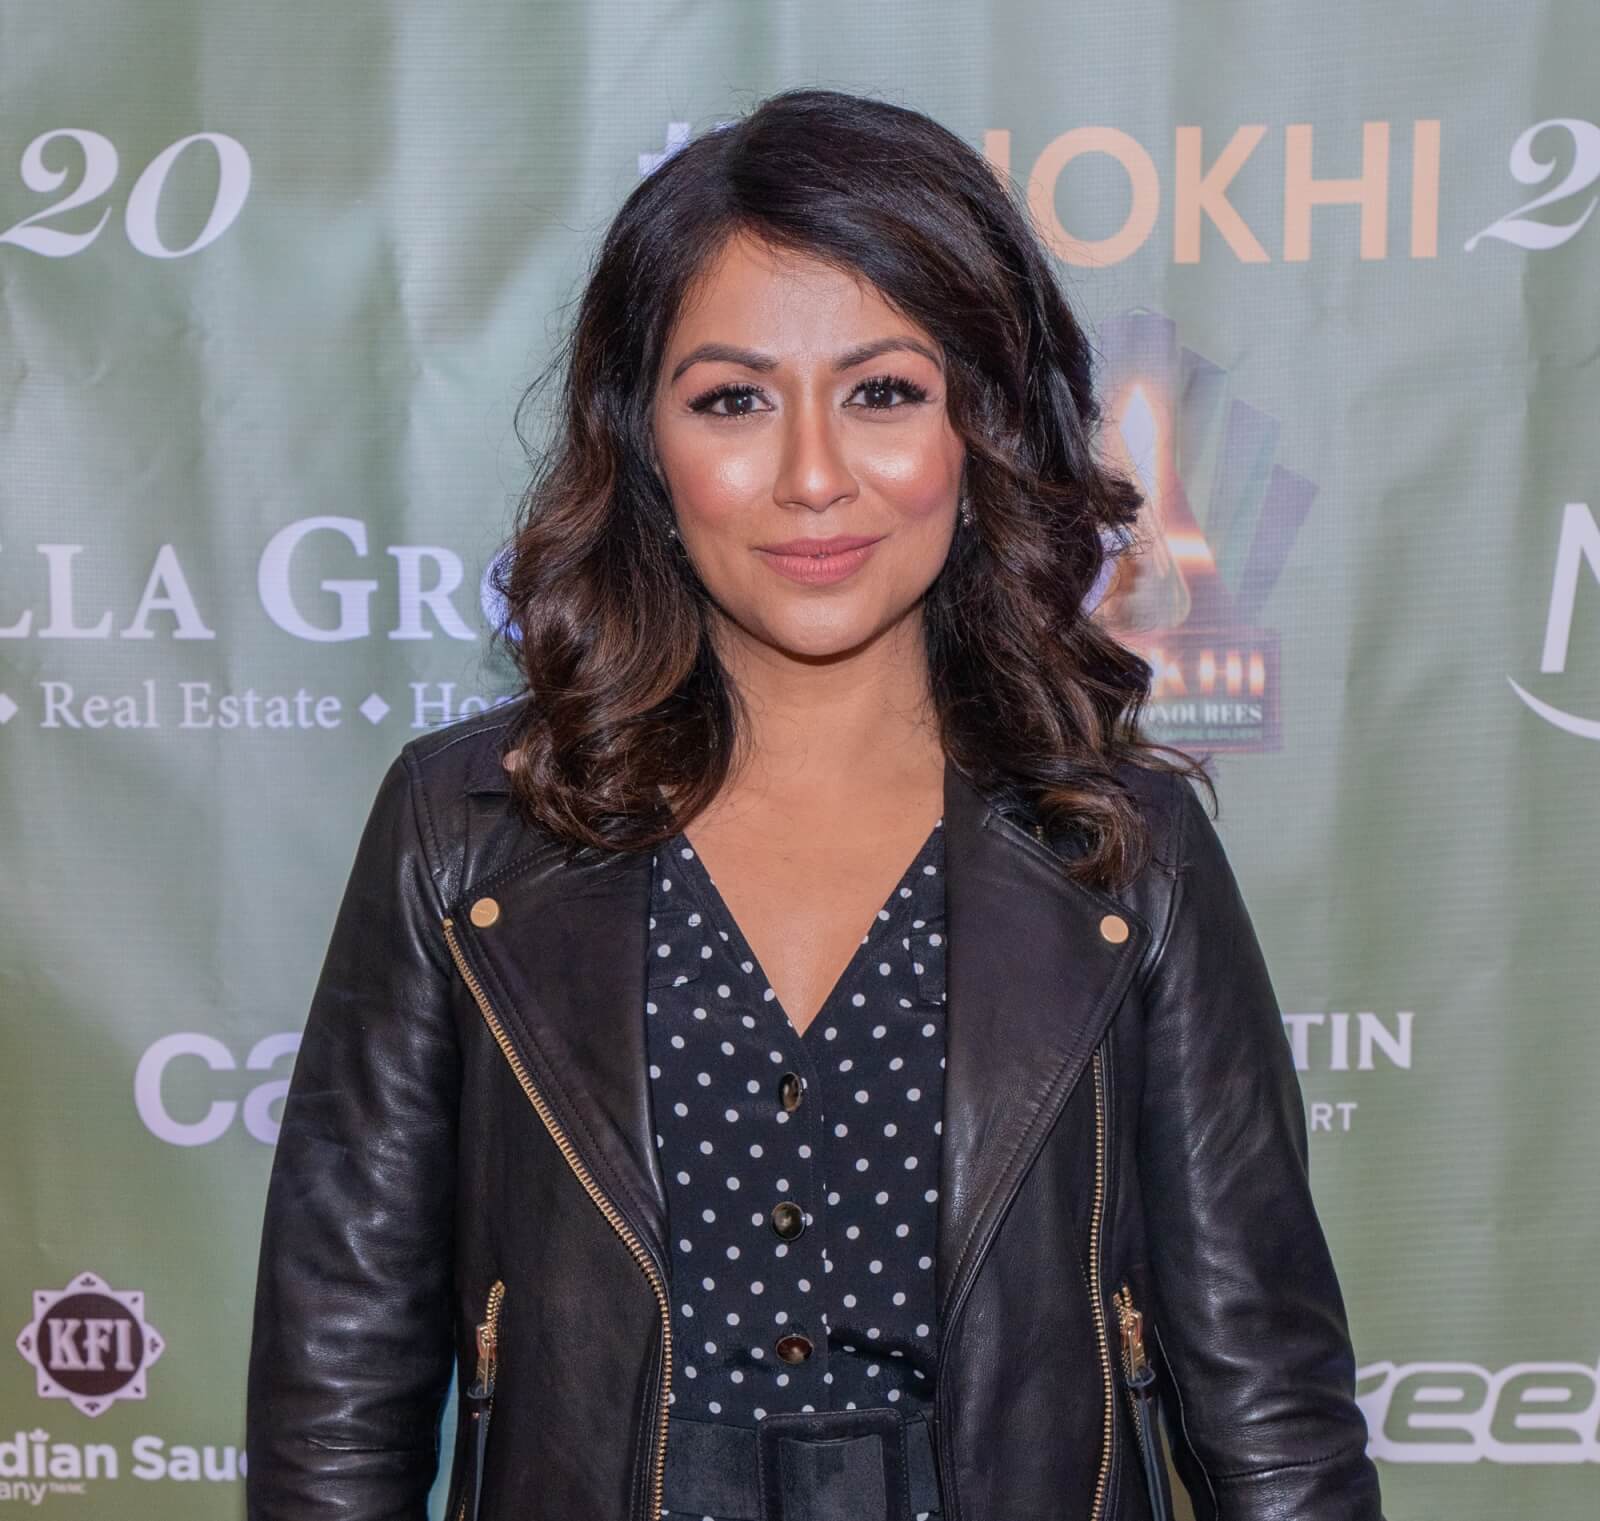 #Anokhi20: Our Fave Beauty Looks From Anokhi’s 20th Anniversary ANOKHI Emerald Event Series